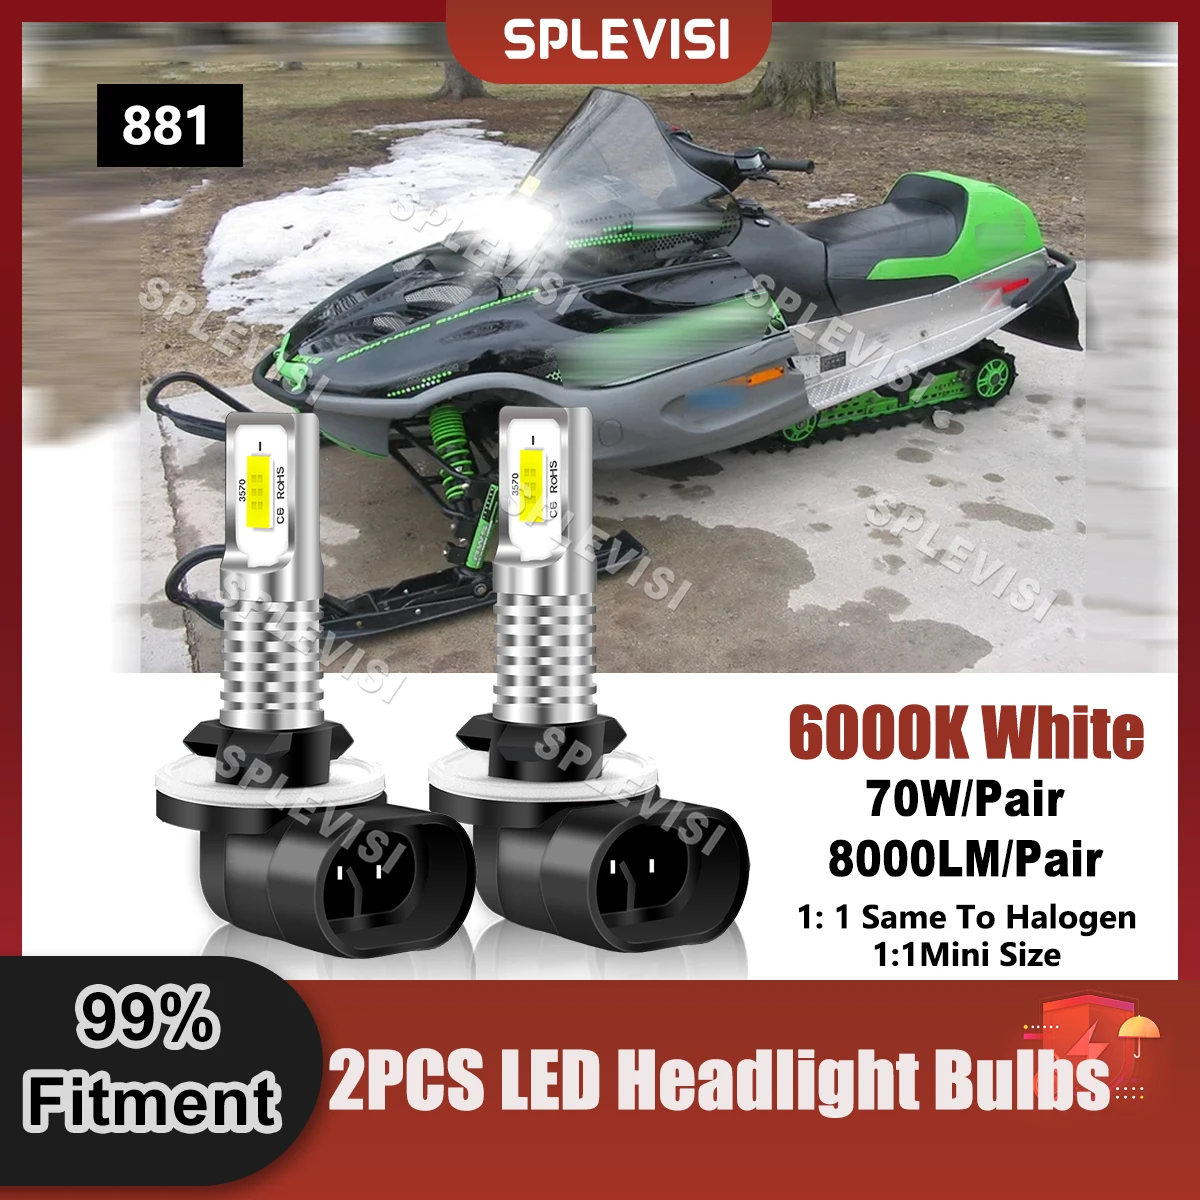 1 Pair Upgrade 881 LED Headlight Pure White For Arctic Cat ZR 500 1998 1999 2000 2001 2002 ZR 600 EFI 1998 1999 2000 2001 2002 1 pcs grey headlight for pajero sport k90 mr566771 2000 2006 front lamp for nativa turning signal clearance for montero sport